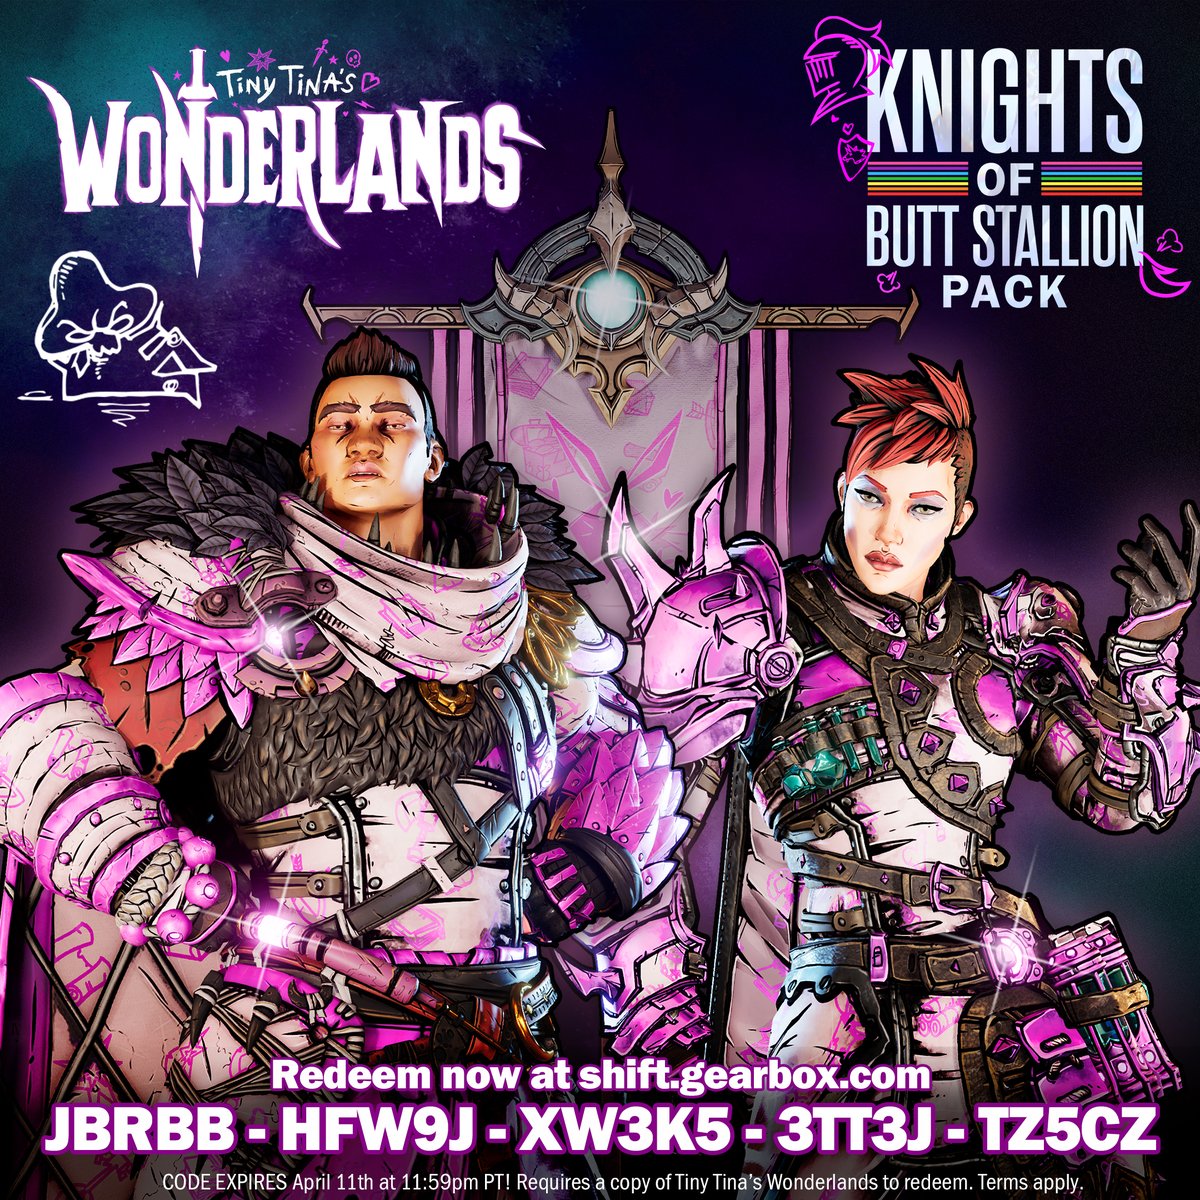 Gear up for #nationalunicornday baybayyy!! 🦄🦄

Thank your lucky stars Butt Stallion has her knights beautifully fitted

JBRBB-HFW9J-XW3K5-3TT3J-TZ5CZ
2kgam.es/3ZNAWhC

Exp: April 11 at 11:59PM PT